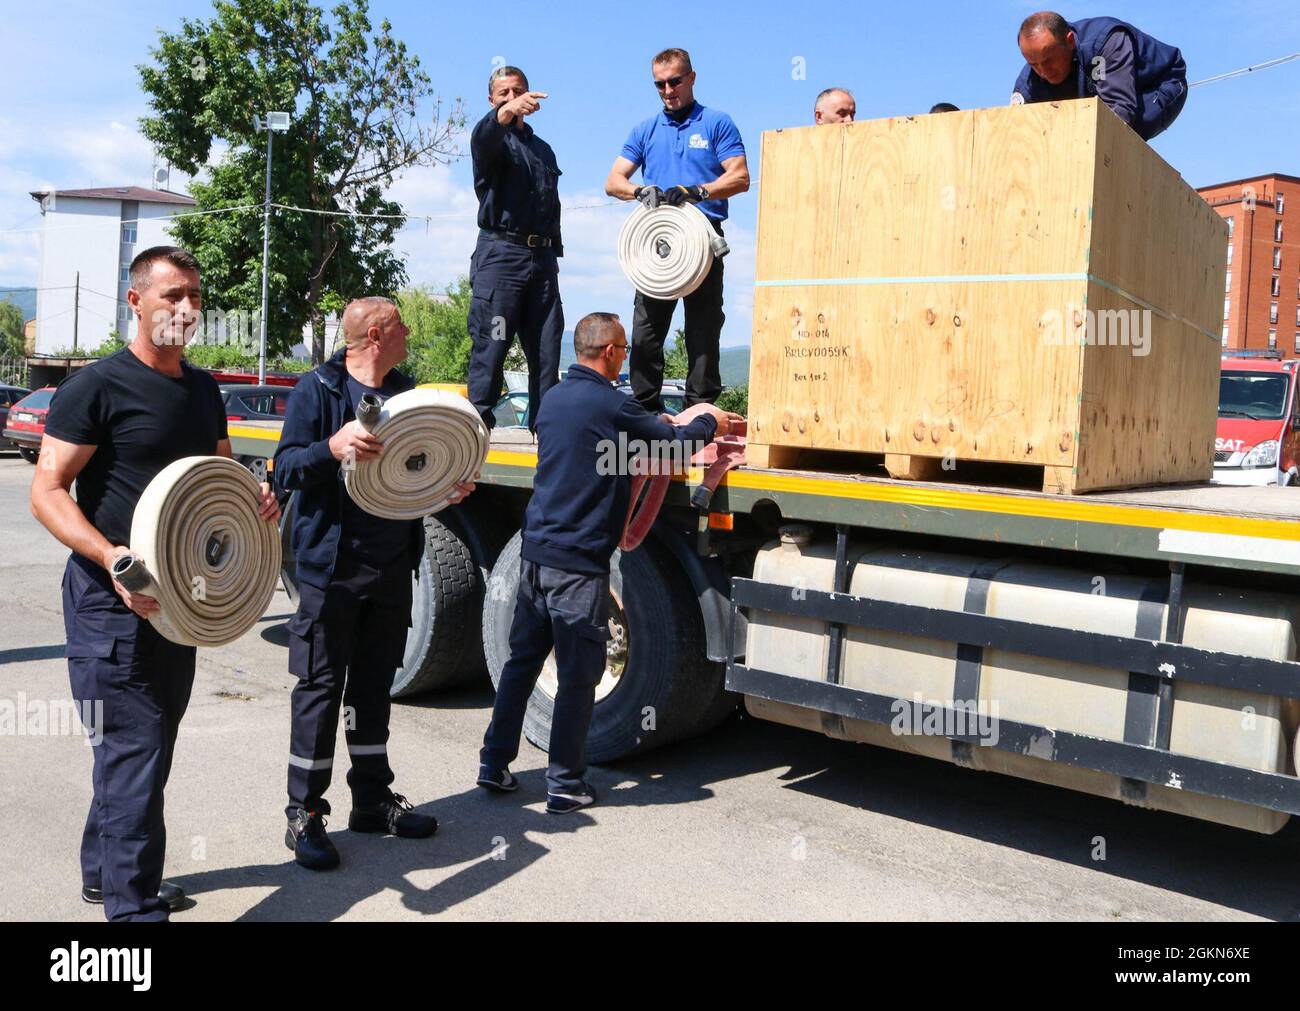 Members of the Camp Bondsteel and Ferizaj/Urosevac Fire Departments unload a crate of hoses in Ferizaj/Urosevac, Kosovo, on June 3, 2021. Working through the Kilo 21 Liaison Monitoring Team assigned to Regional Command-East, Kosovo Force, the CBS Fire Department donated 140 sections of hoses to the municipality’s only firefighting team. Stock Photo